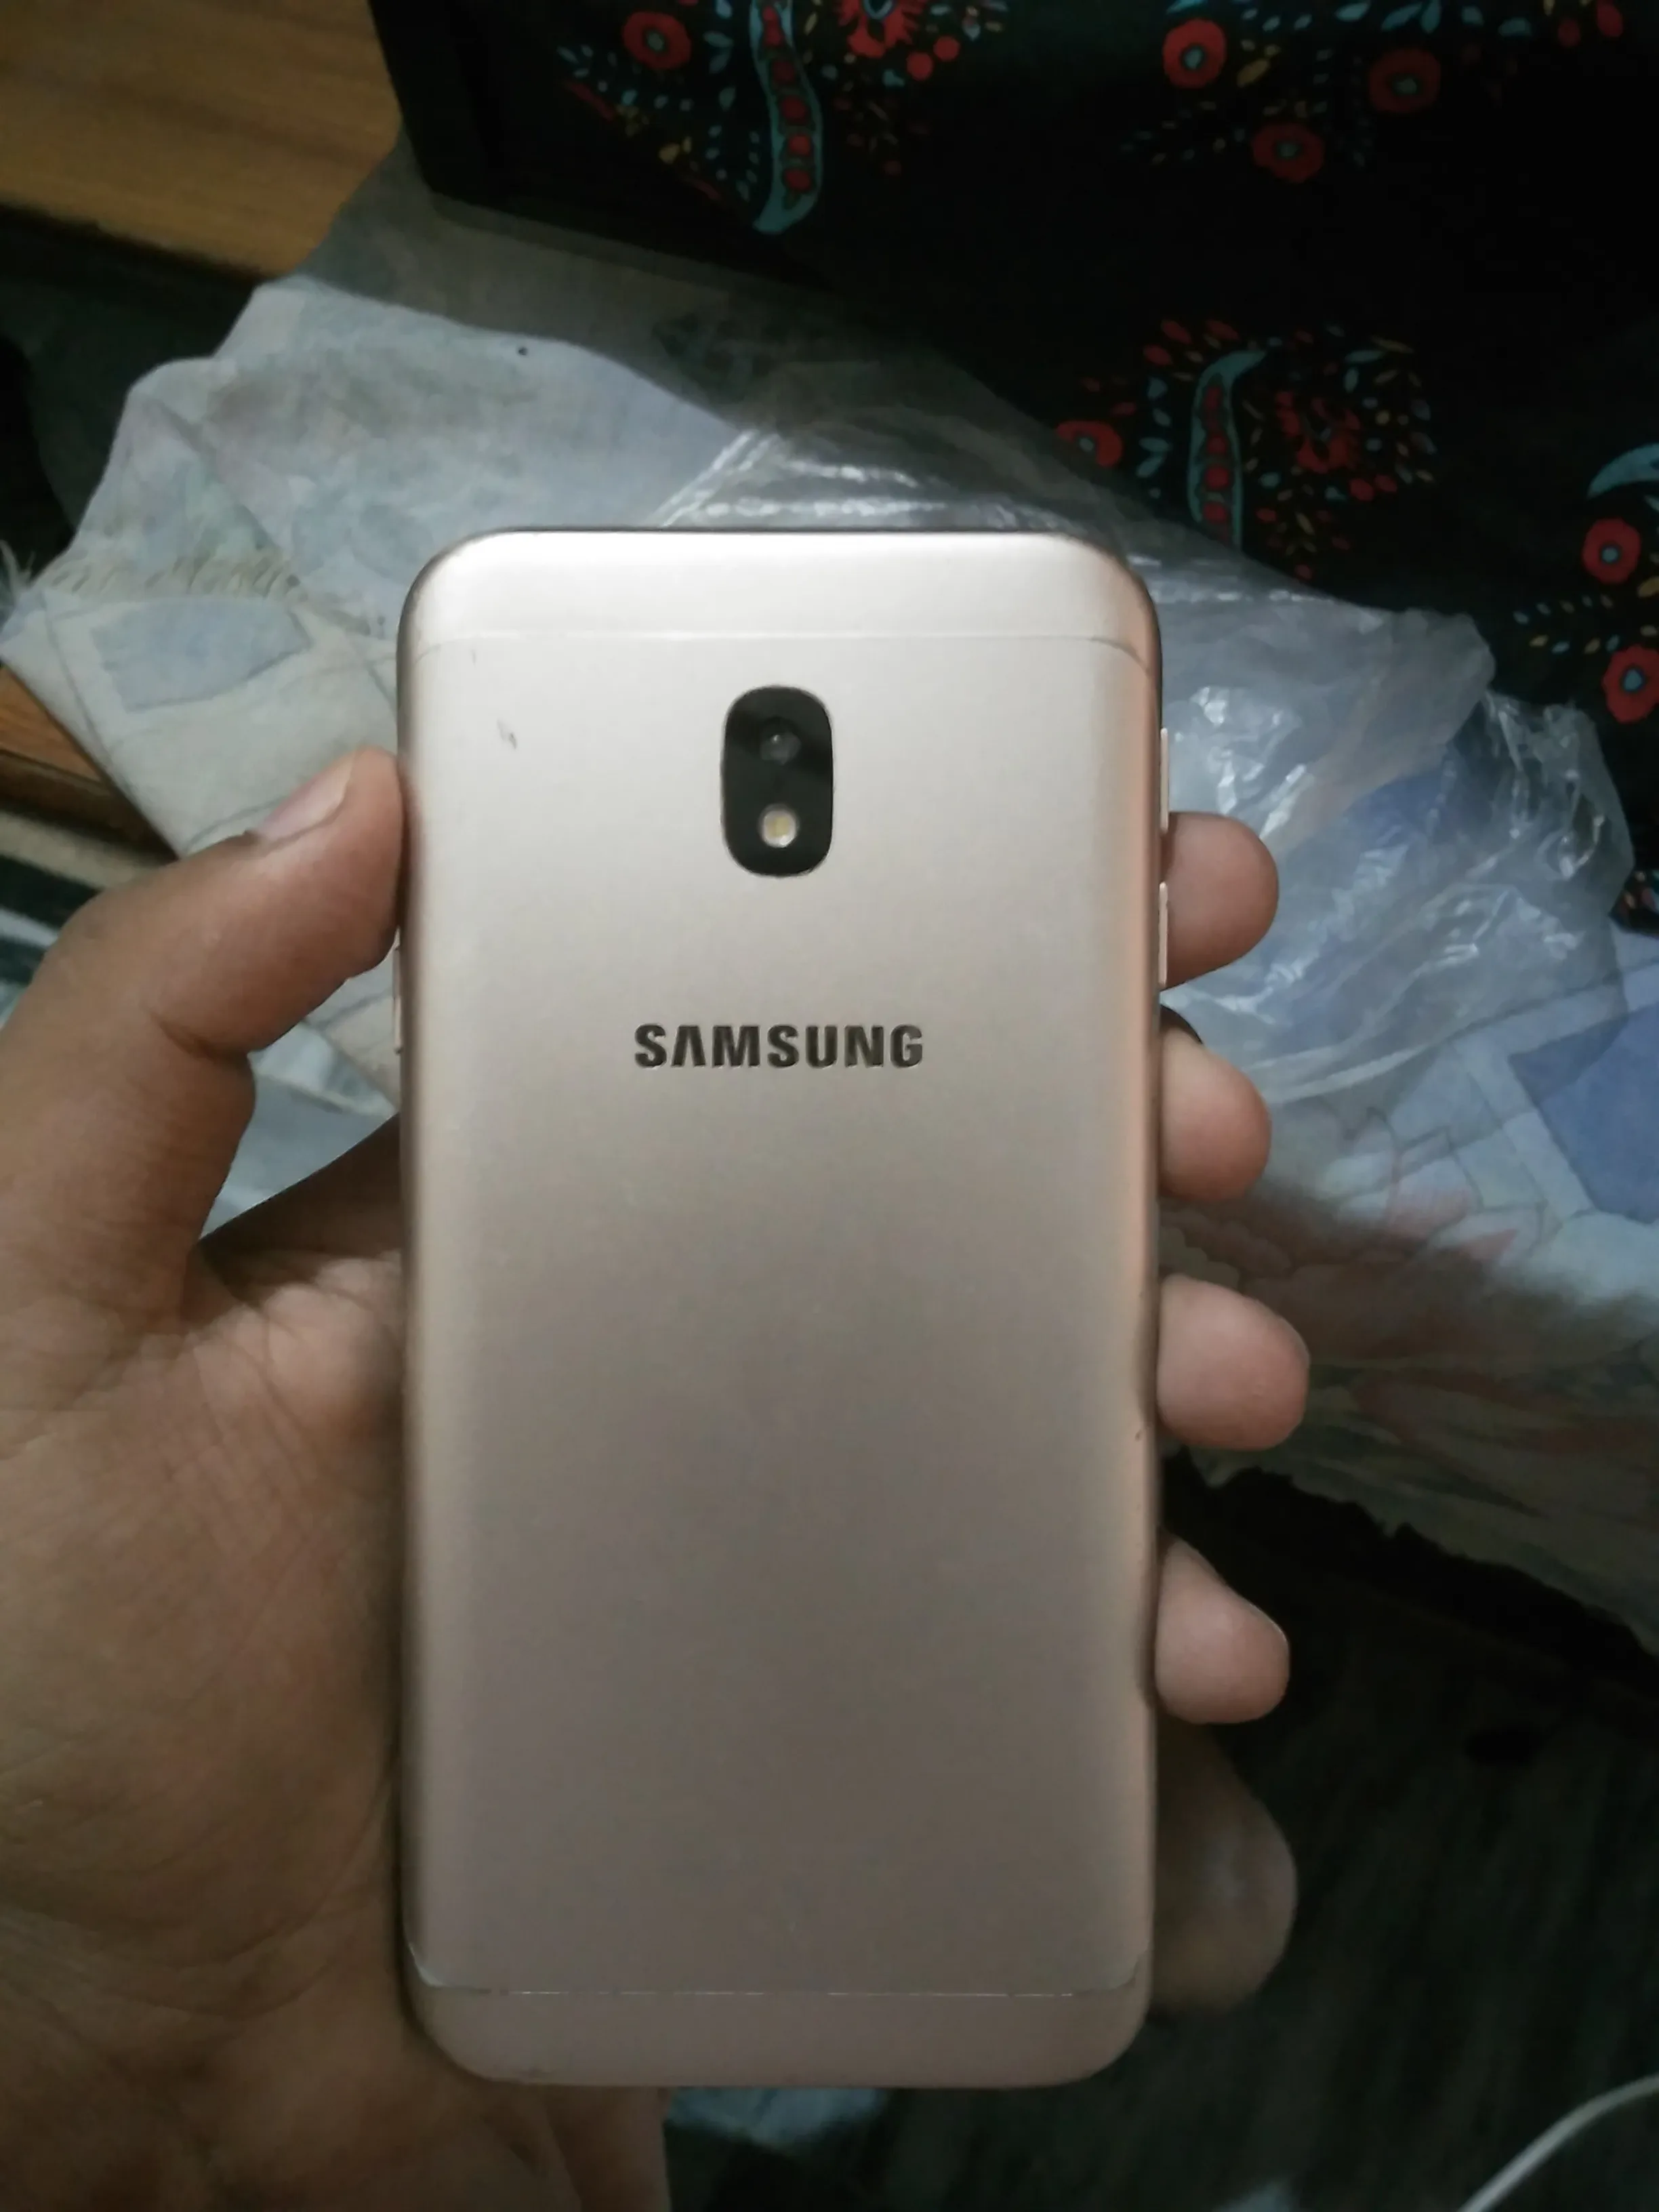 Samsung Galaxy J3 17 3 32 Used Mobile Phone For Sale In Punjab